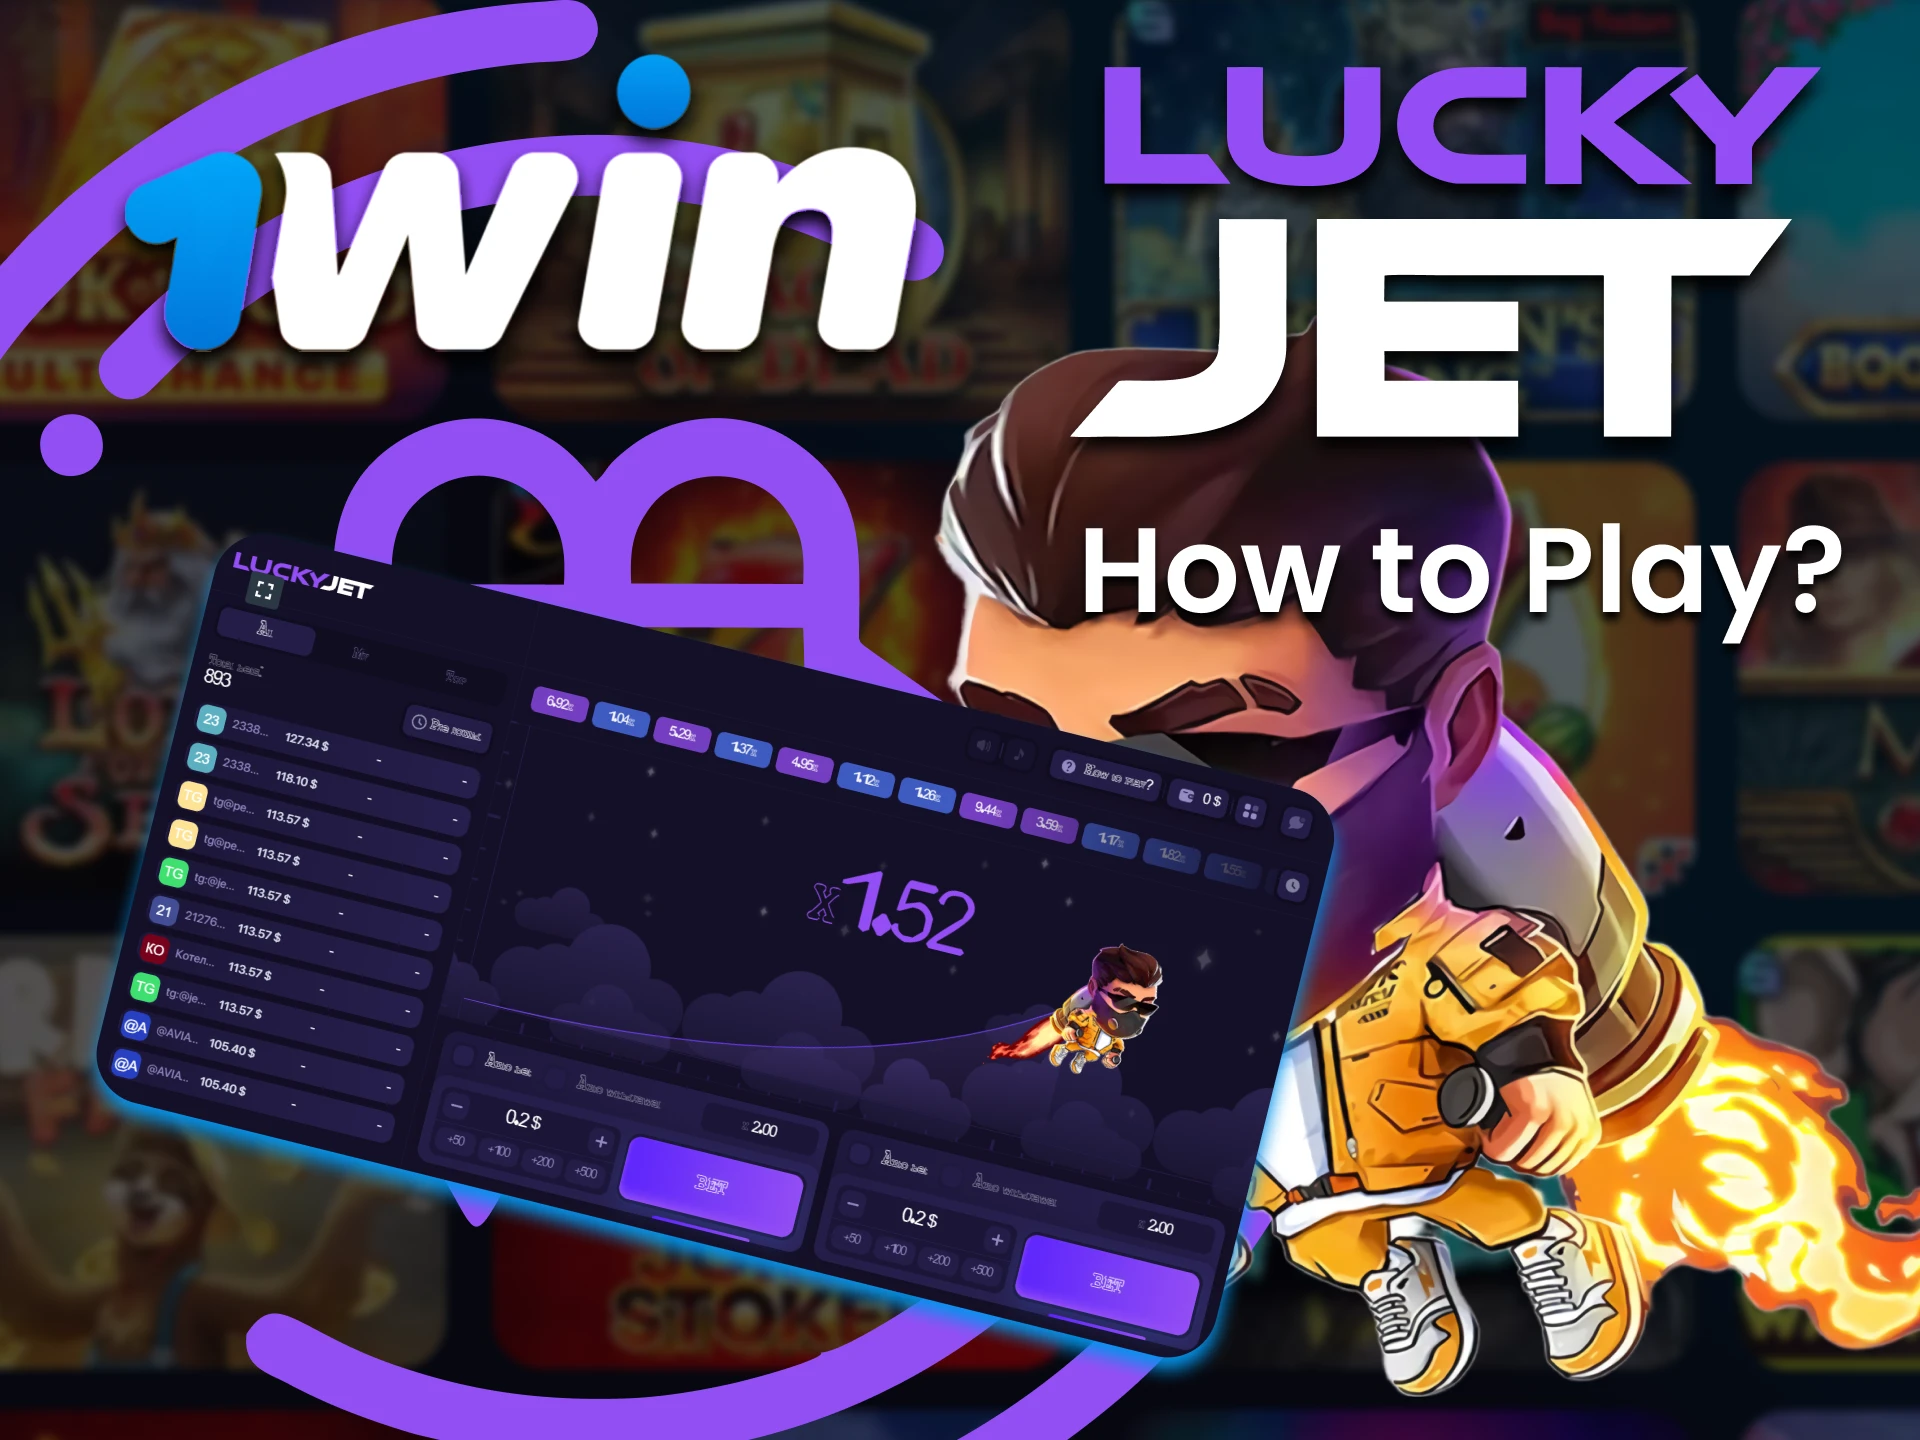 Choose the game Lucky Jet in the right section on 1win.